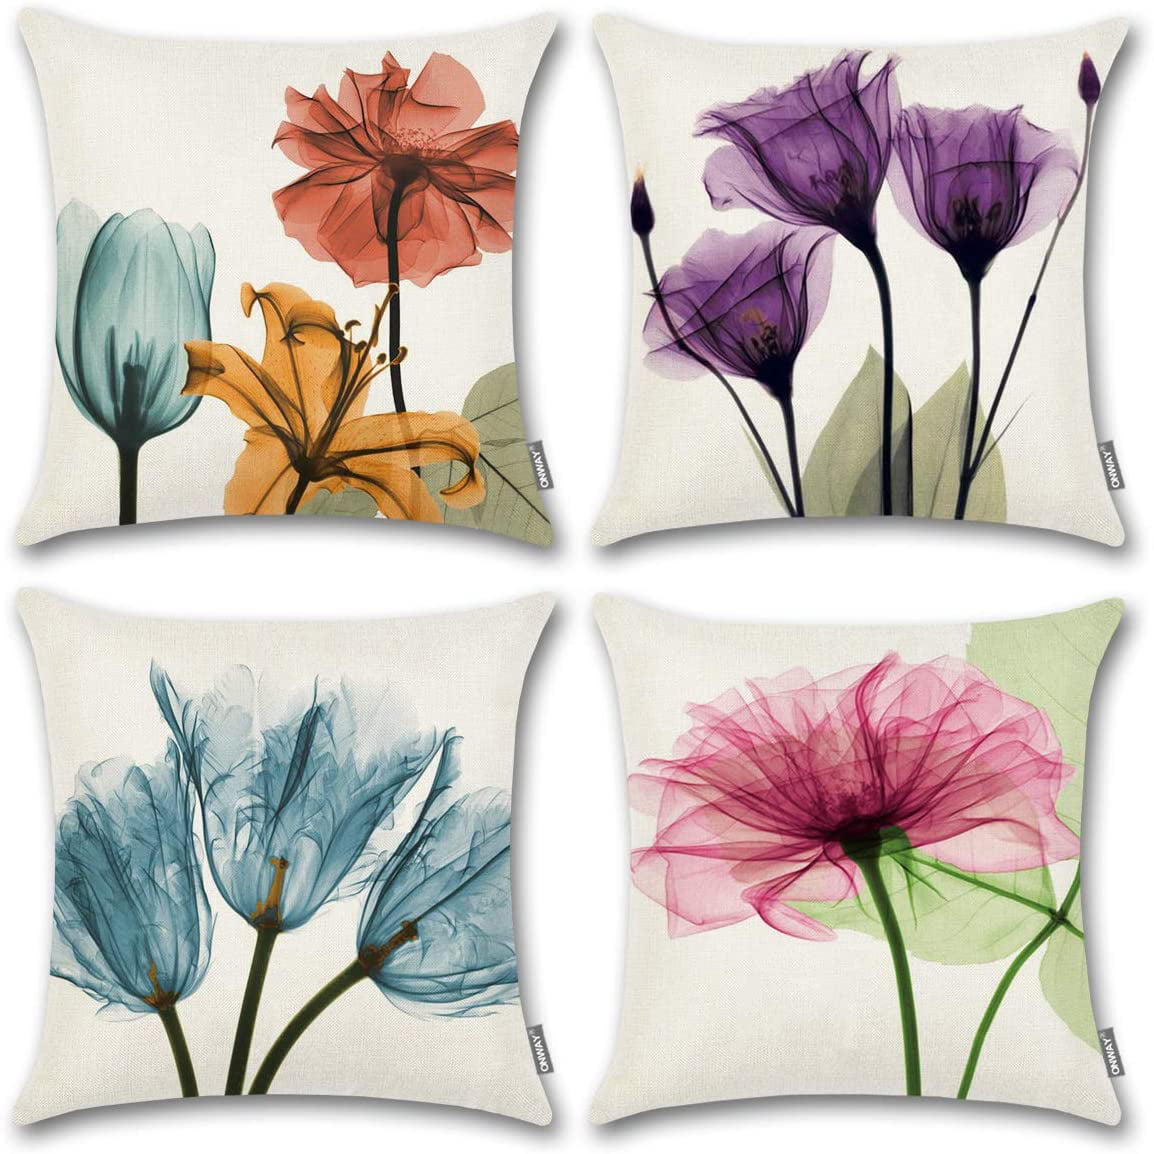 Swono Colorful Floral Pattern with Butterfly Decorative Pillow Case Cotton Linen Cushion Cover Decor 18x18 Inch Pillowcase for Home